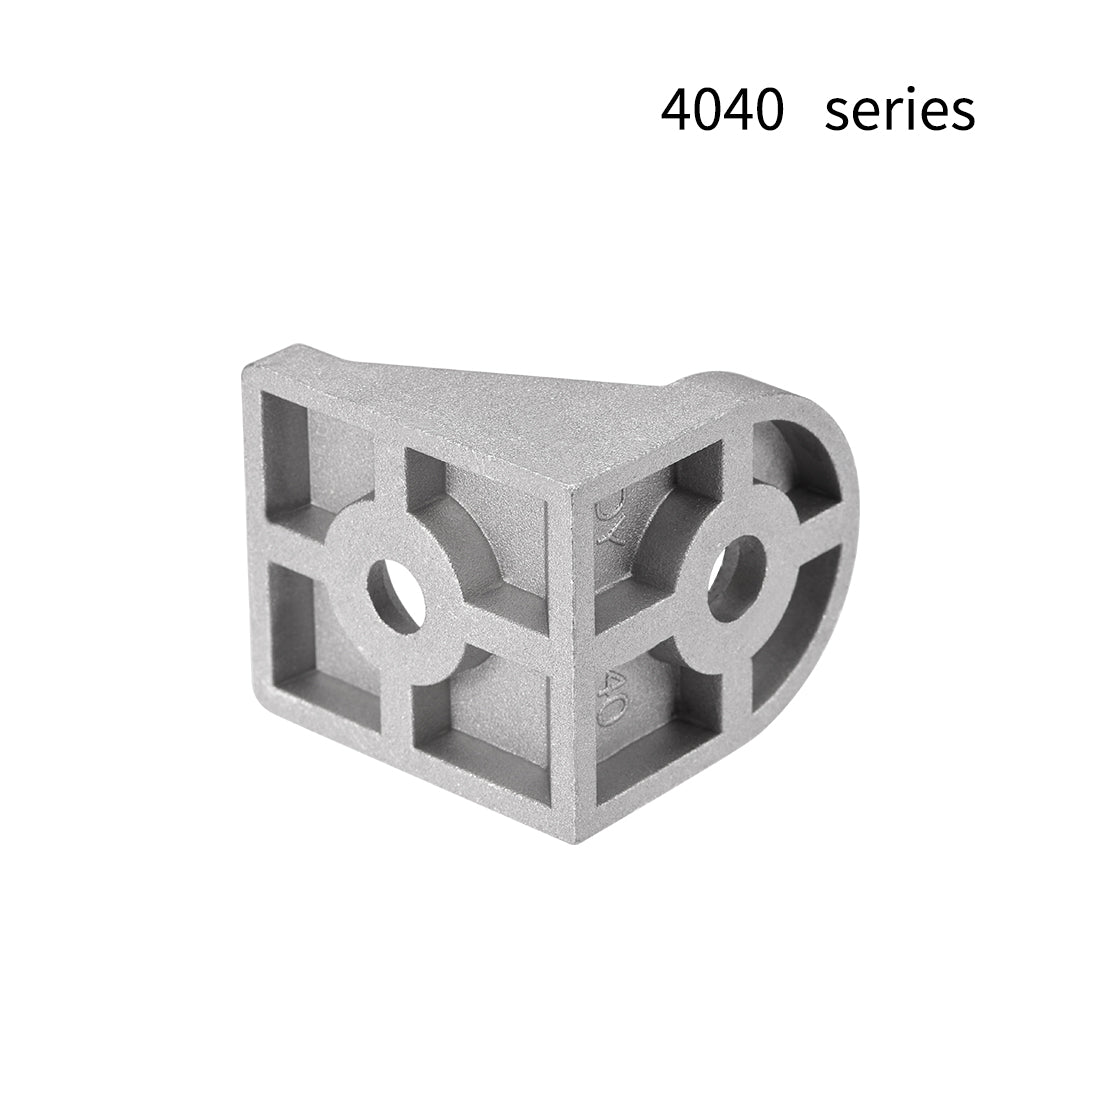 uxcell Uxcell Angle Arbitrary Bracket Set, Corner L Connector for 4040 Series Aluminum Extrusion Profile with Slot 8mm, 6 Pcs